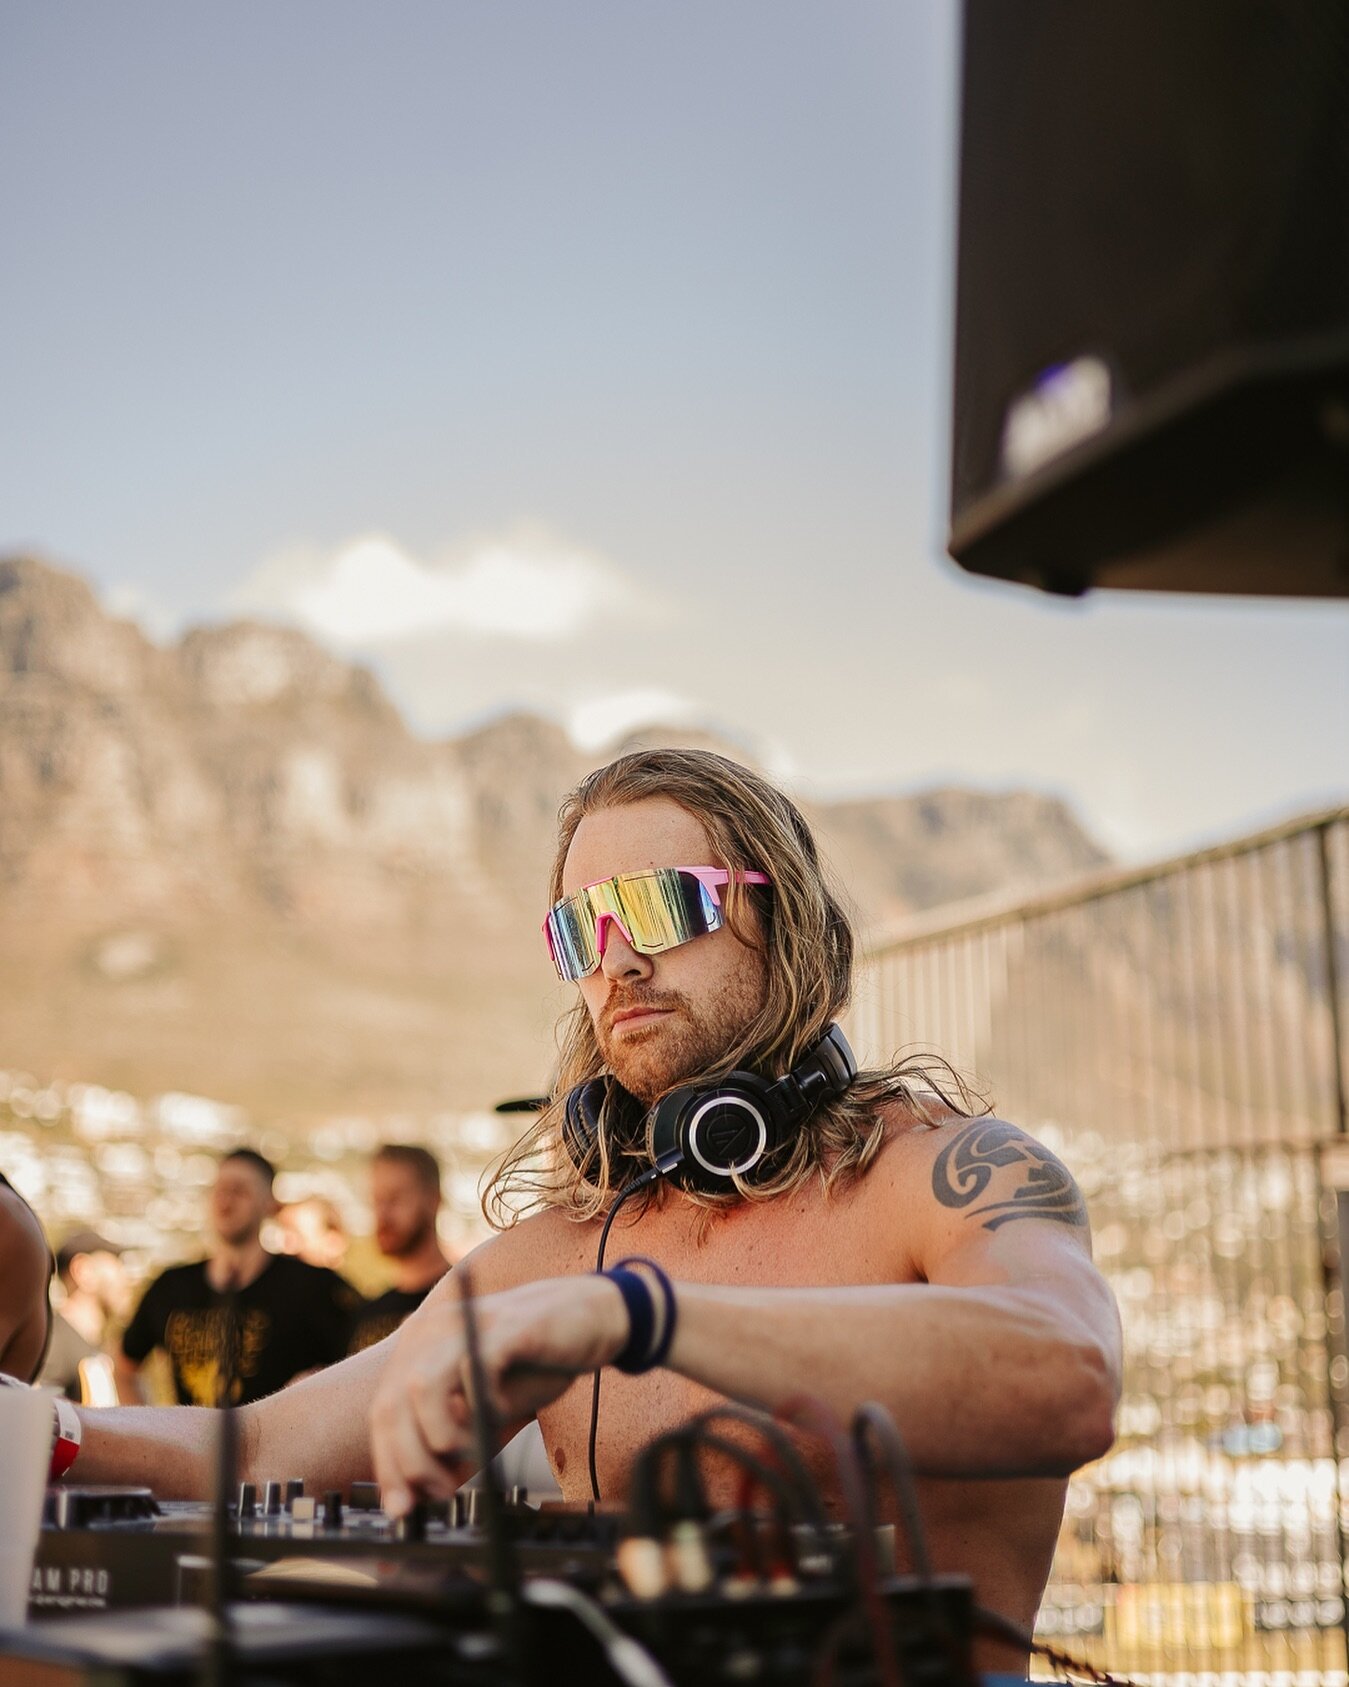 Cue festive music 🎶 

What&rsquo;s your favourite track to workout/compete to? 

Let&rsquo;s make a playlist in the comments ⬇️

#Fitchella23 #JoinTheParty #FitnessFestival #PartyZone #FestivalPlaylist #CapeTown #Summer